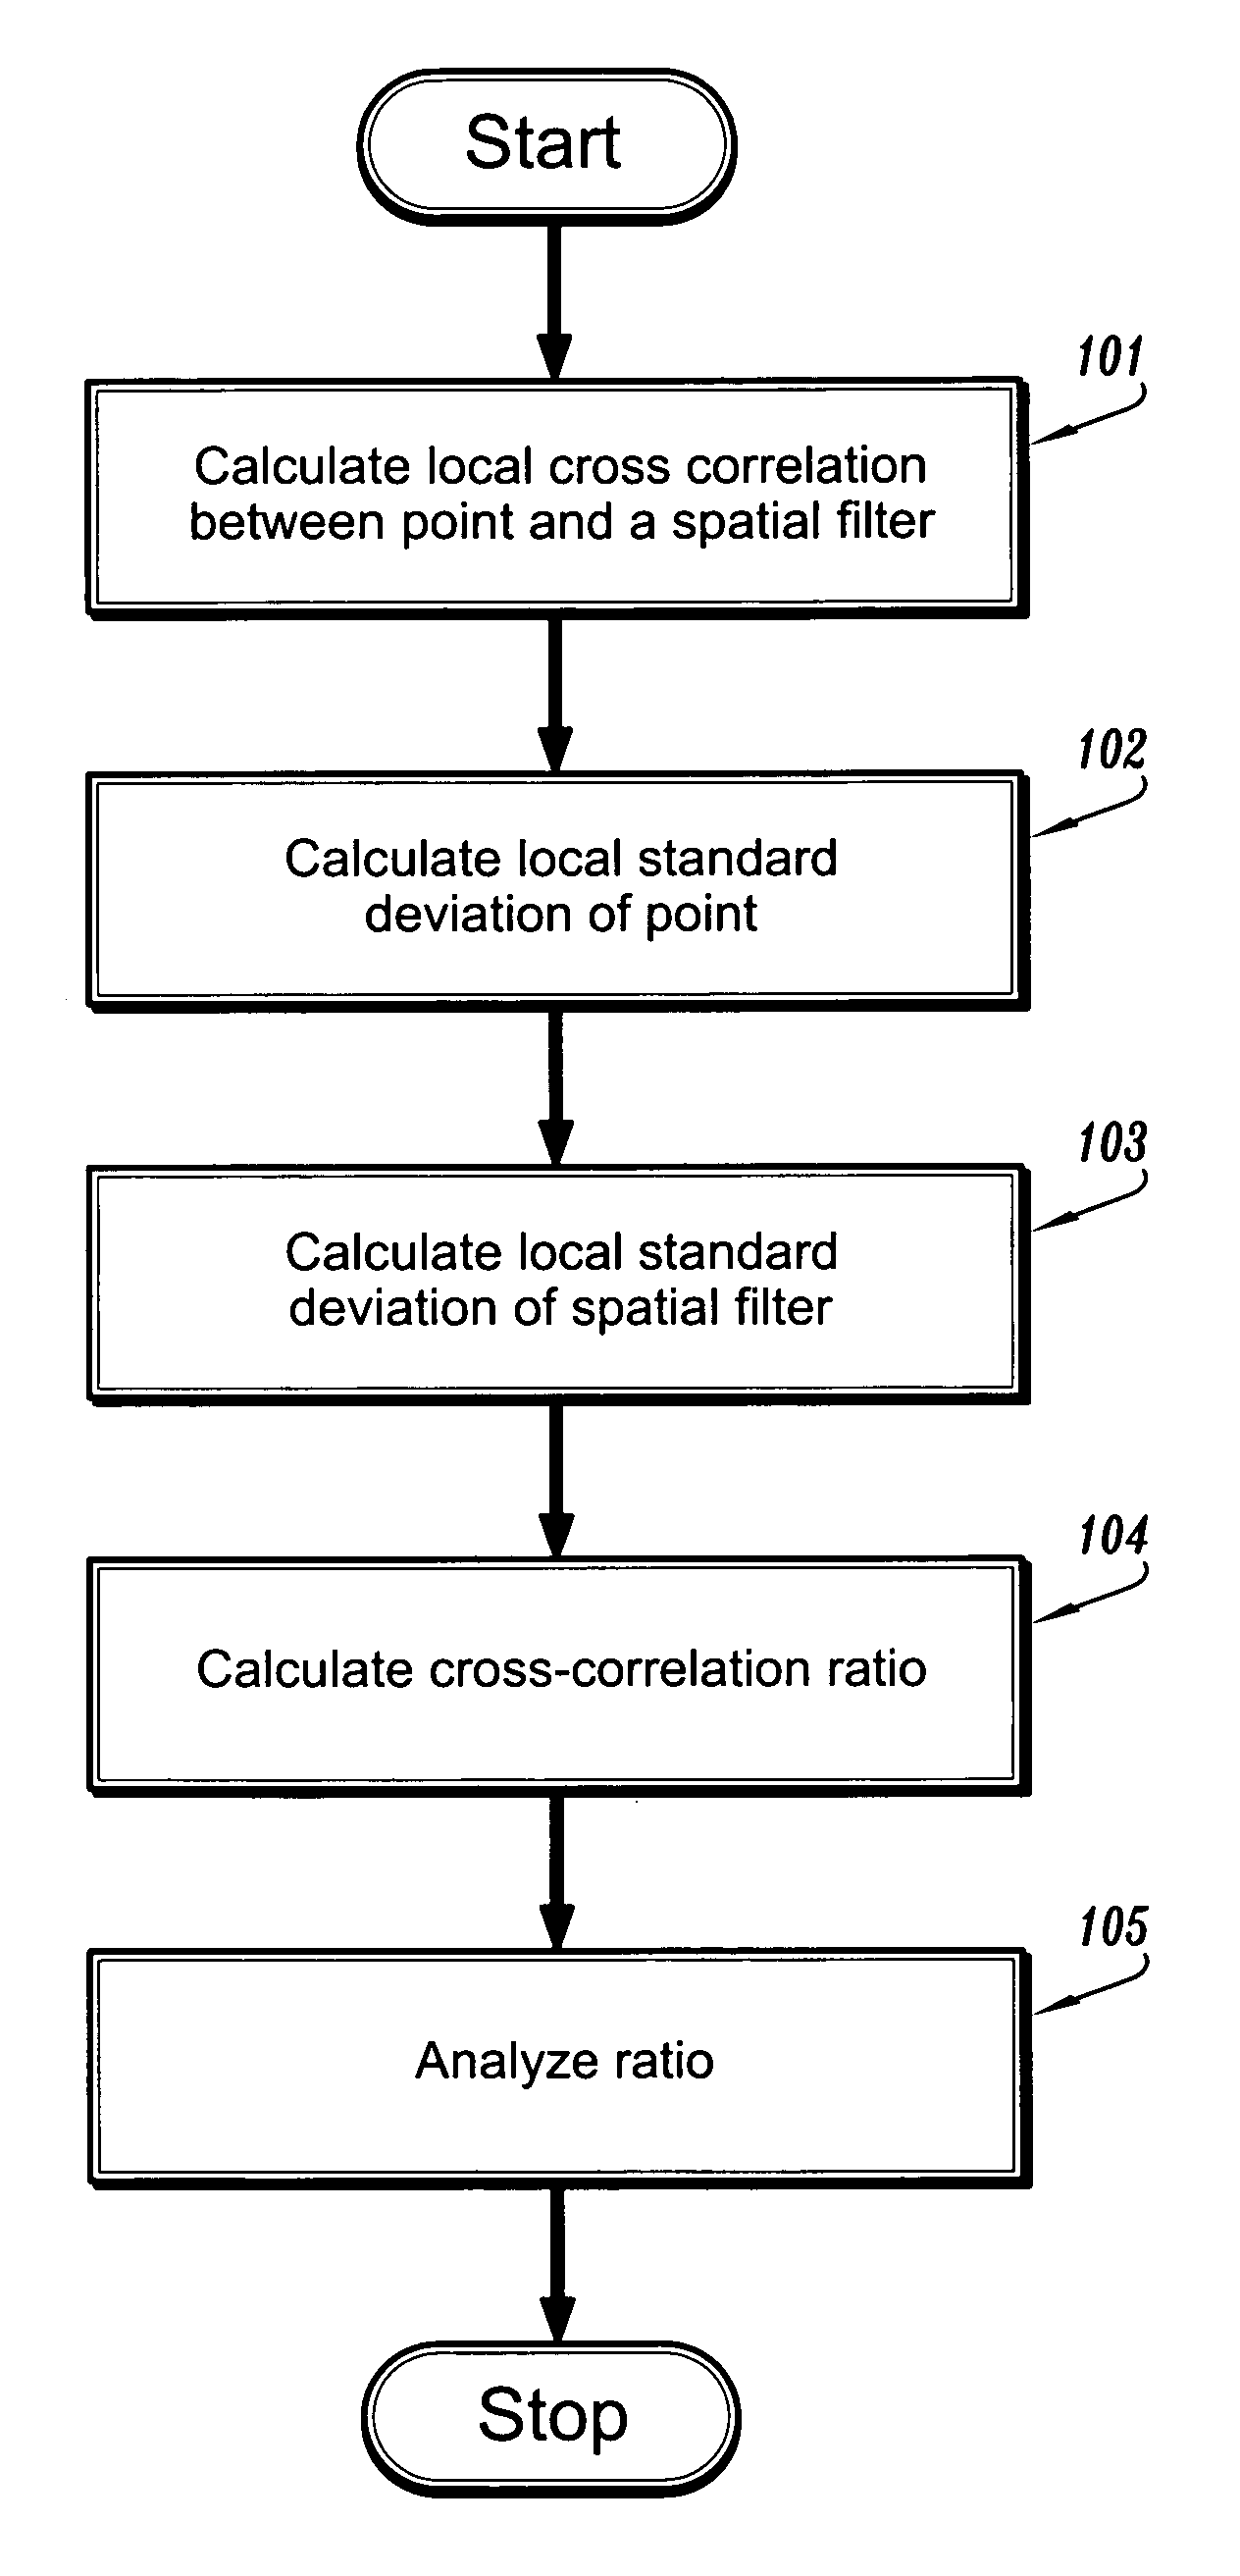 Method and system for fast normalized cross-correlation between an image and a Gaussian for detecting spherical structures